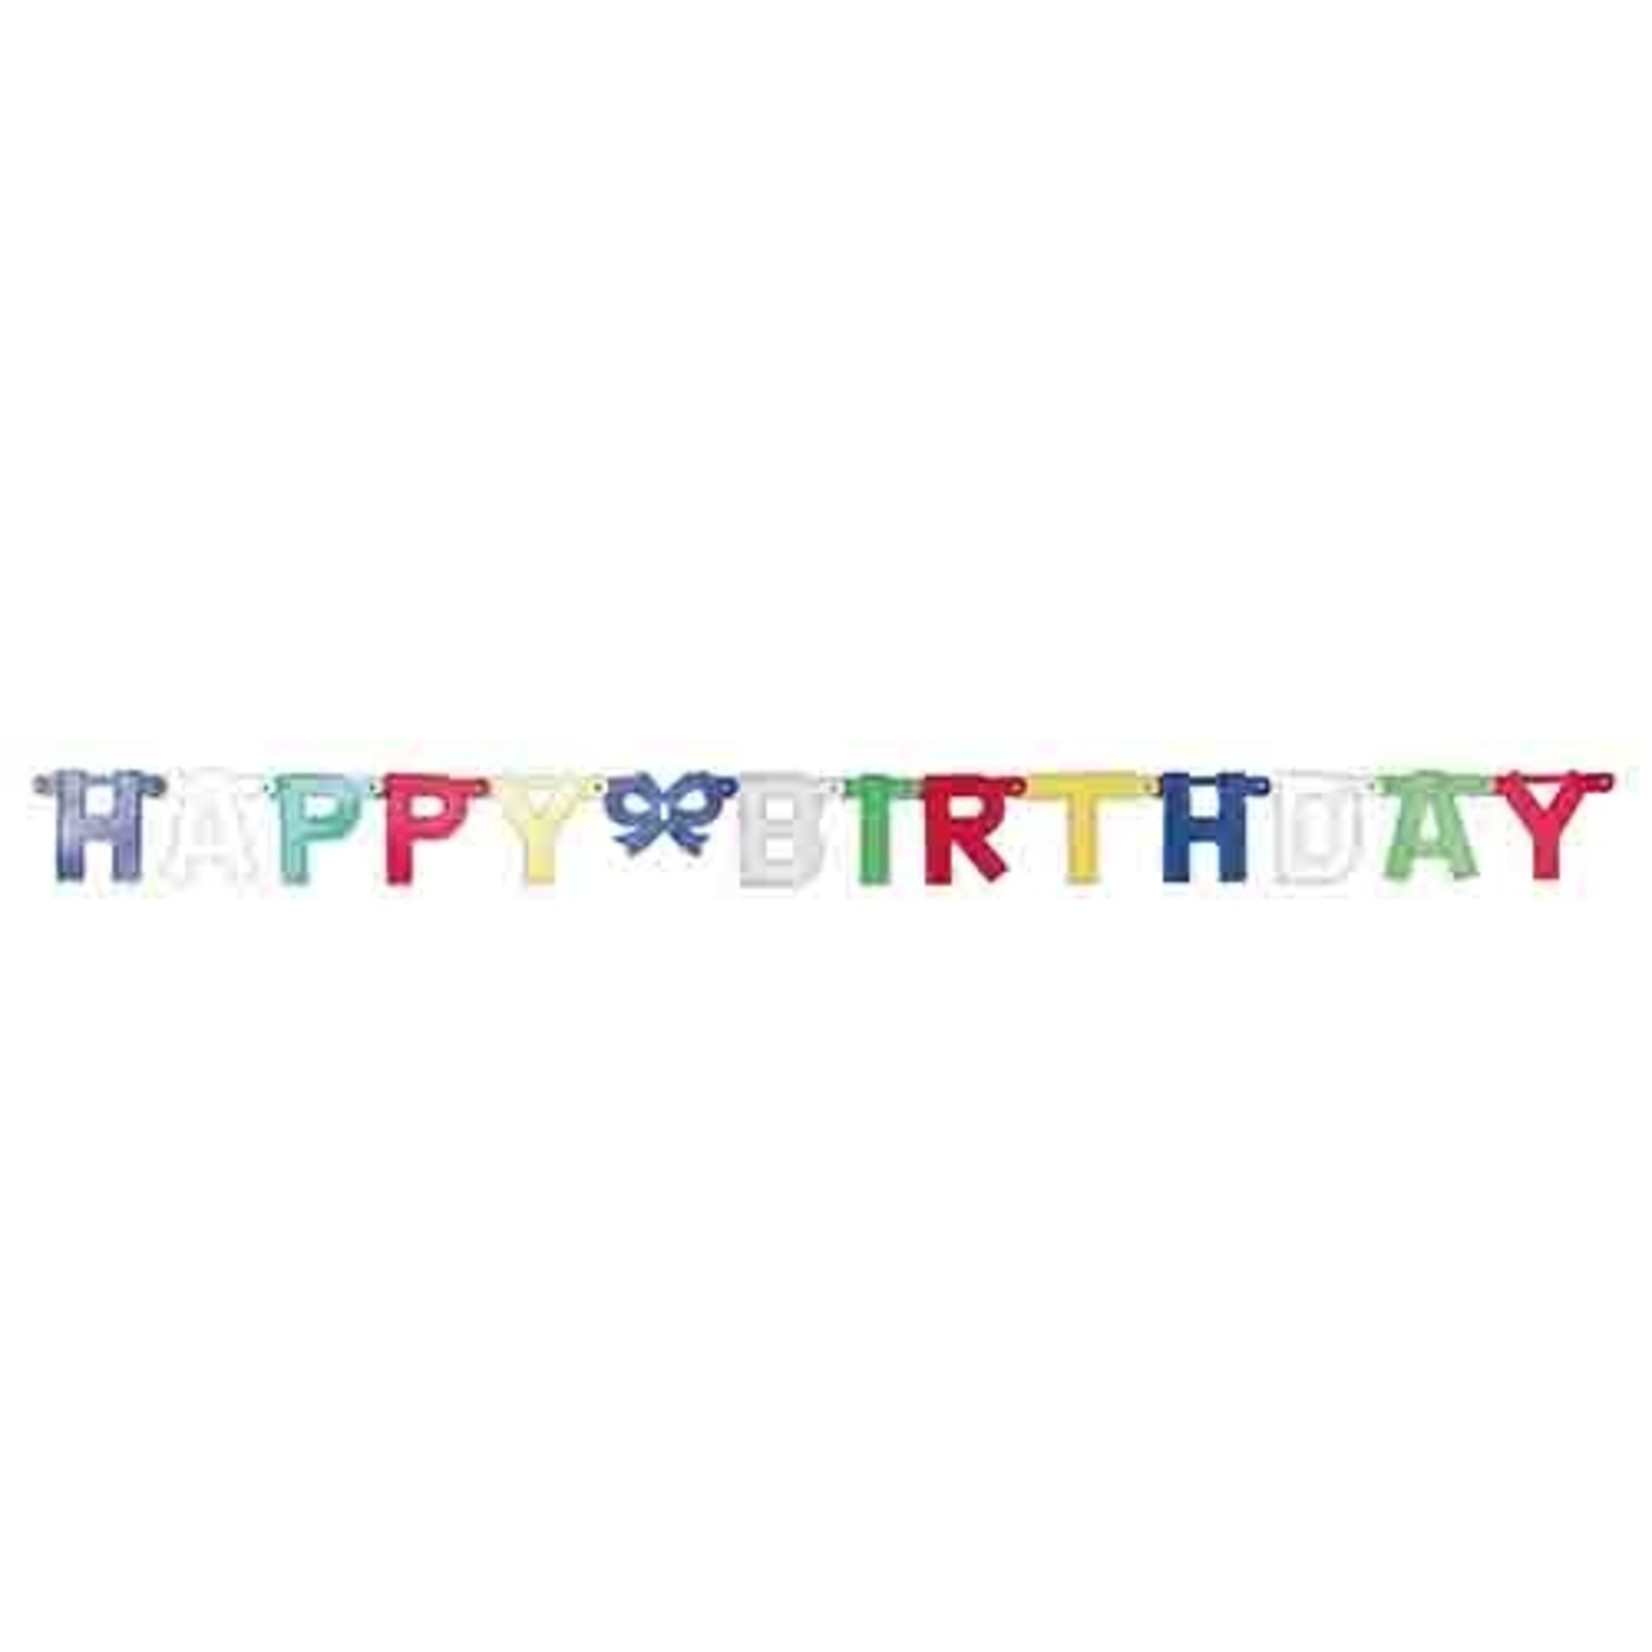 Amscan Happy Birthday Multi-Color Letter Banner - 7'